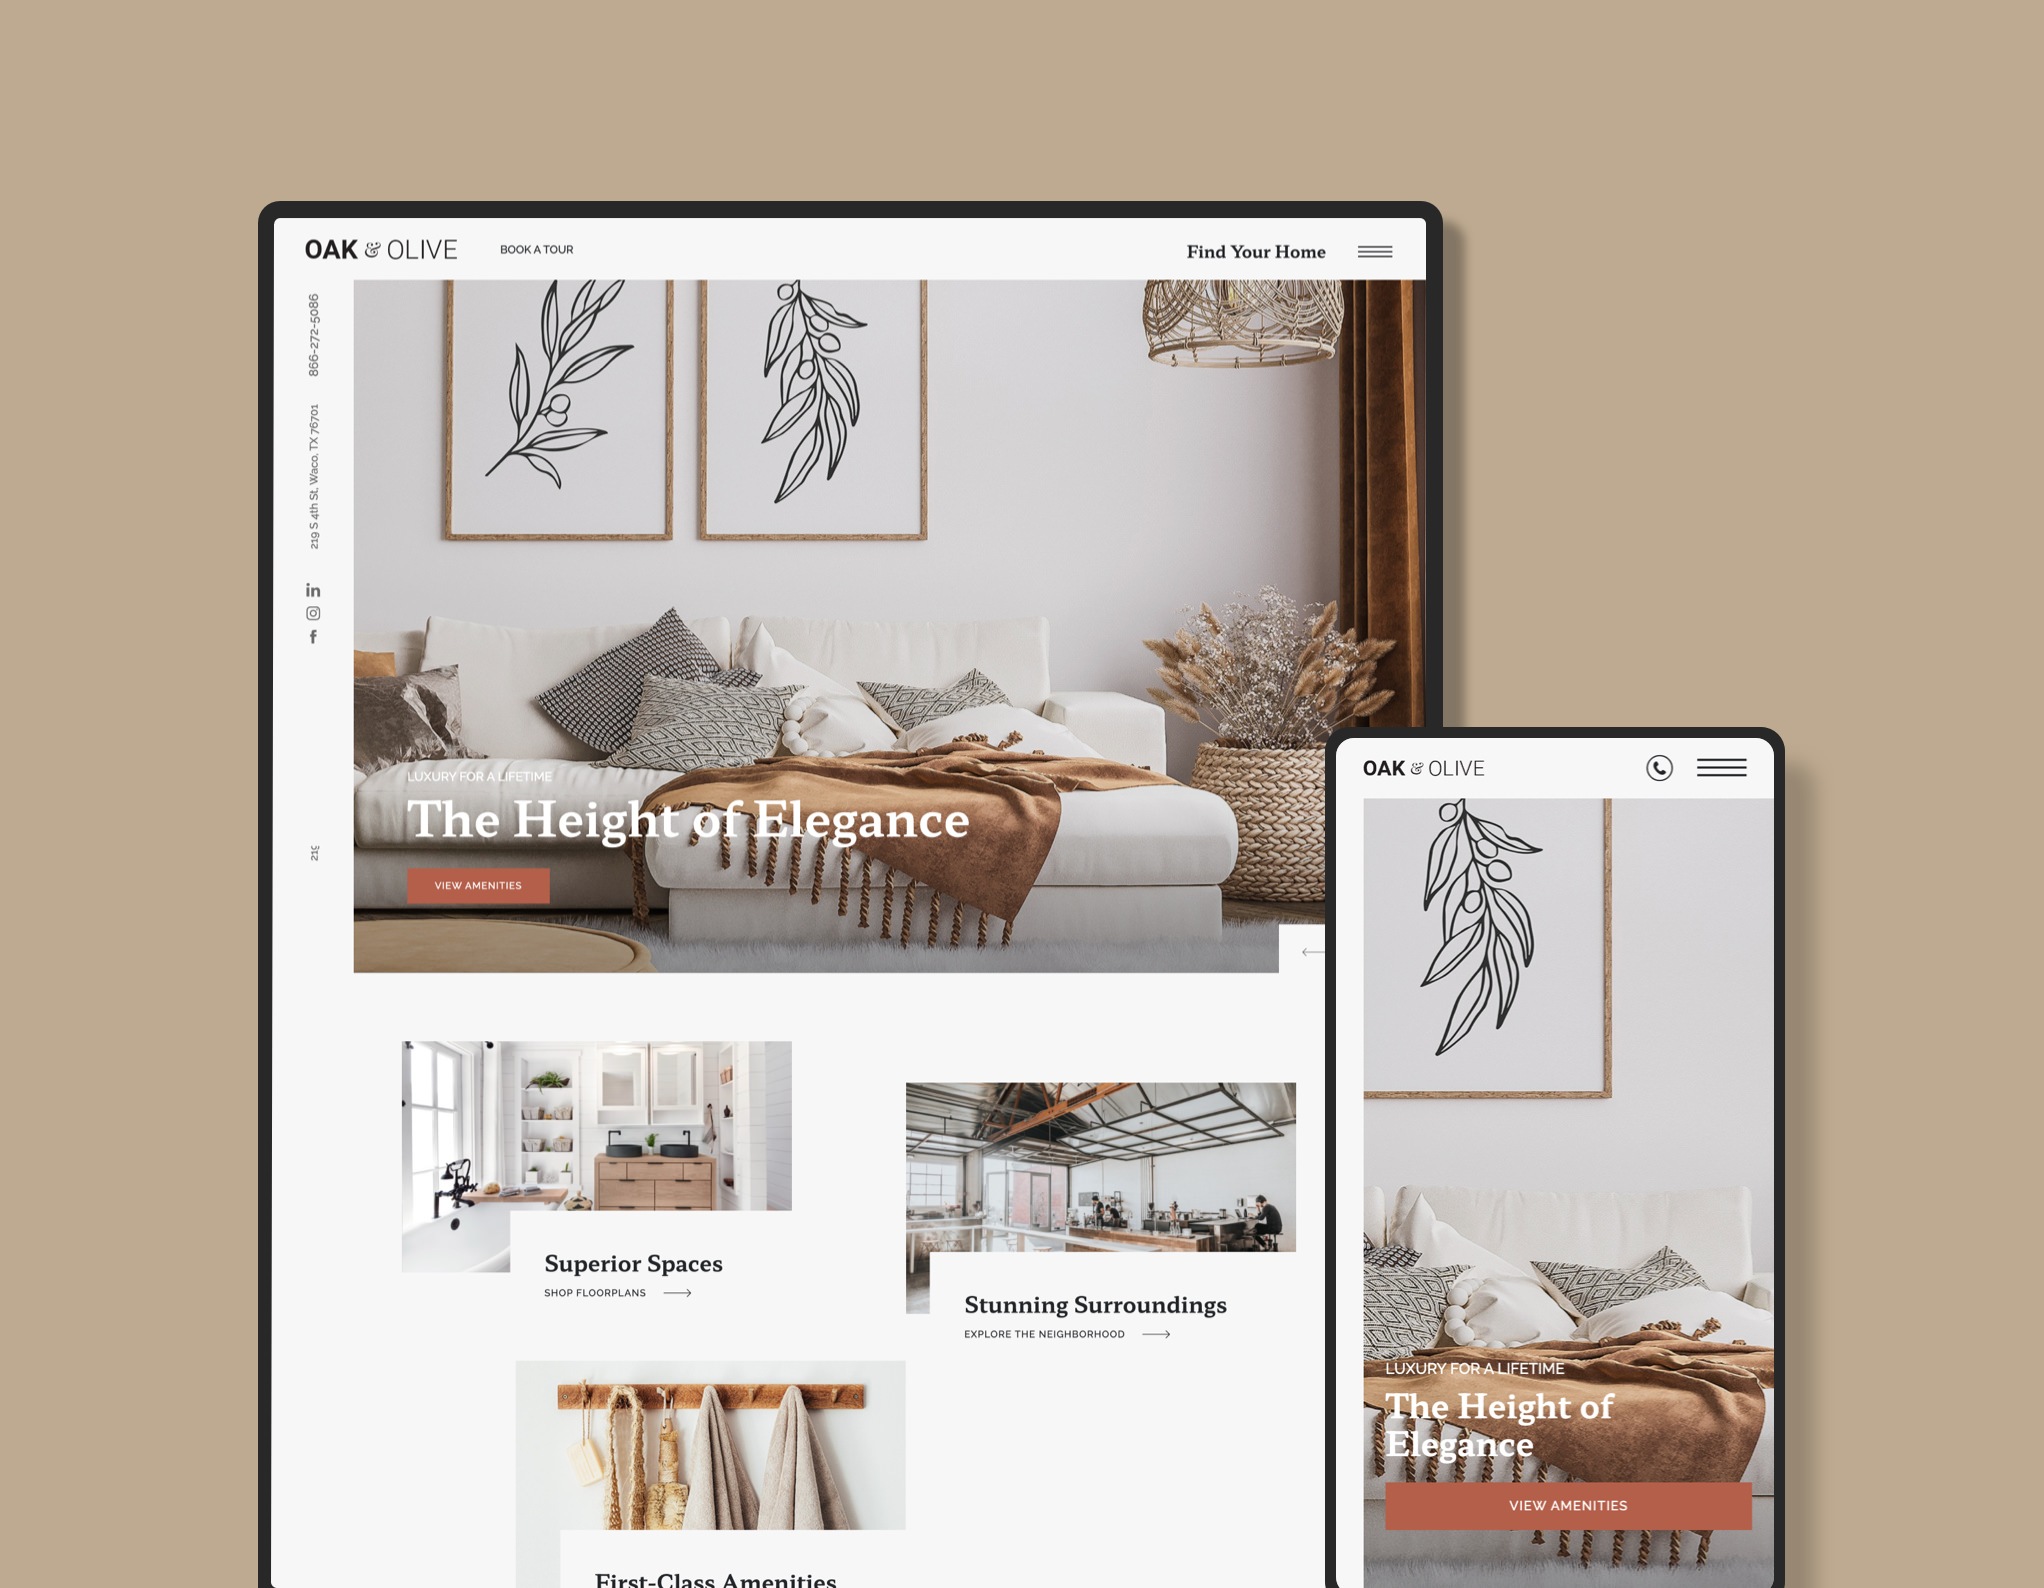 Oak & Olive Multifamily Website Theme Powered by Jonah